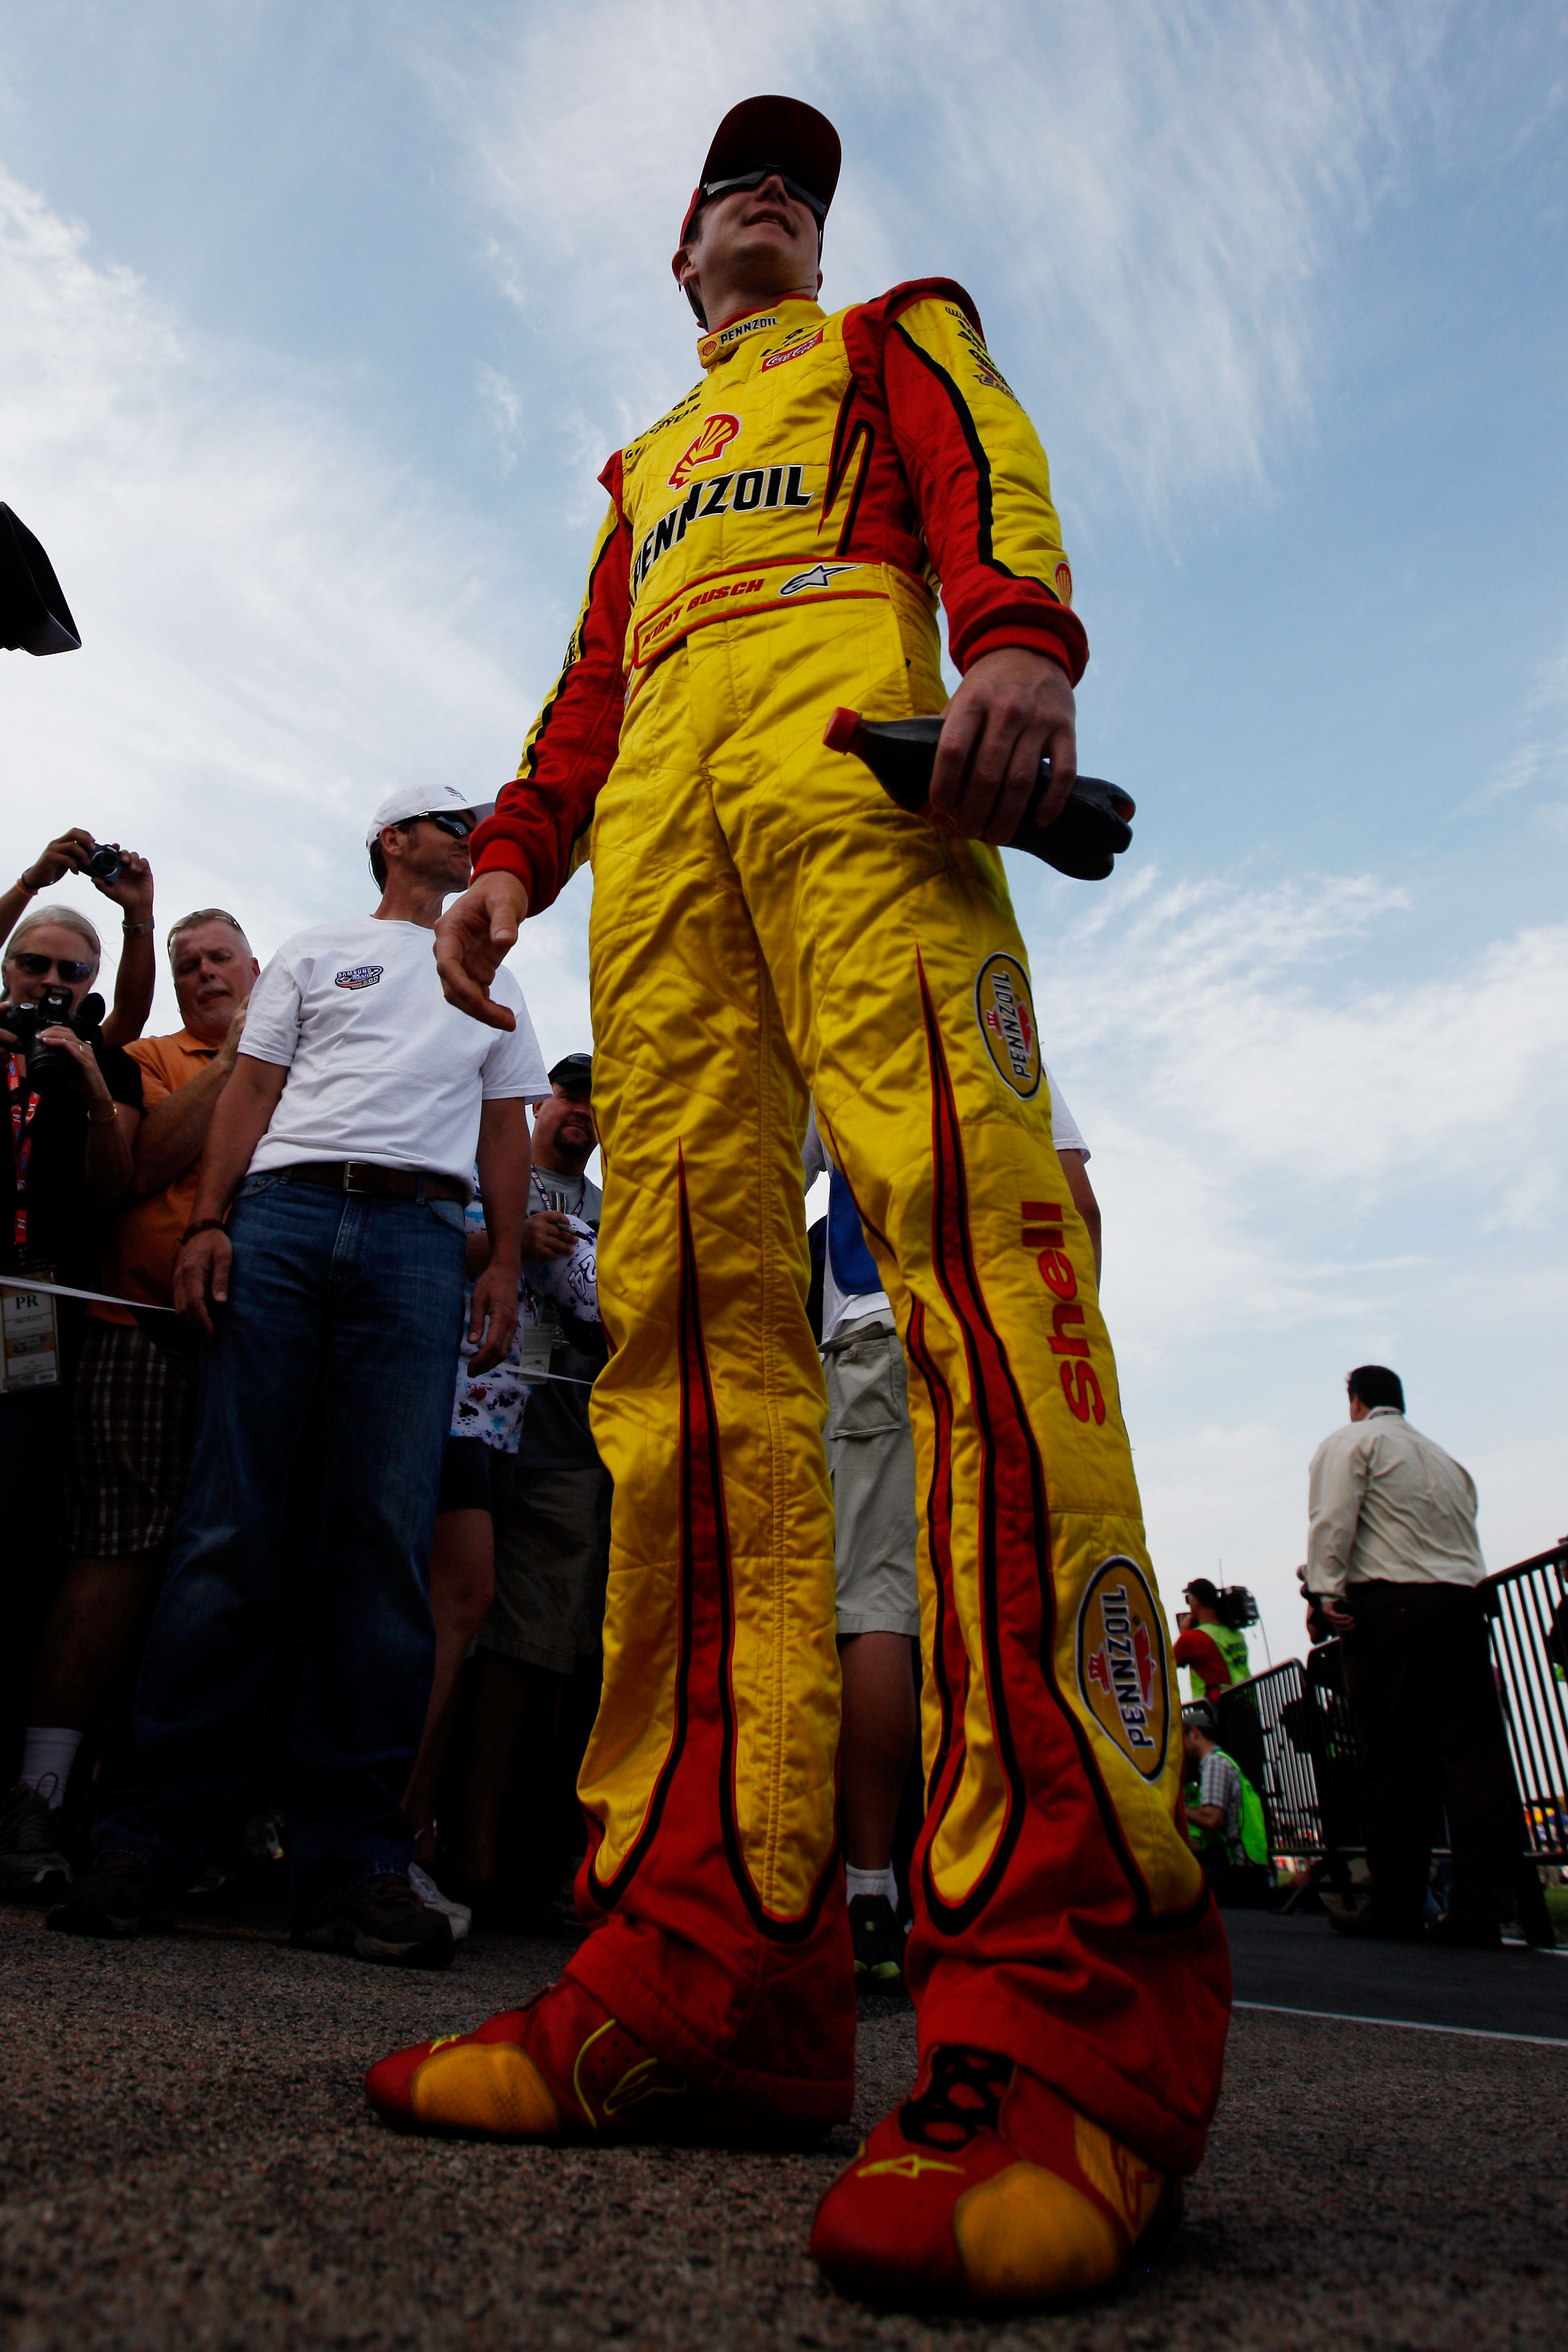 FORT WORTH, TX - APRIL 09:  Kurt Busch, driver of the #22 Shell/Pennzoil Dodge, stands on the track prior to the NASCAR Sprint Cup Series Samsung Mobile 500 at Texas Motor Speedway on April 9, 2011 in Fort Worth, Texas.  (Photo by Chris Graythen/Getty Ima